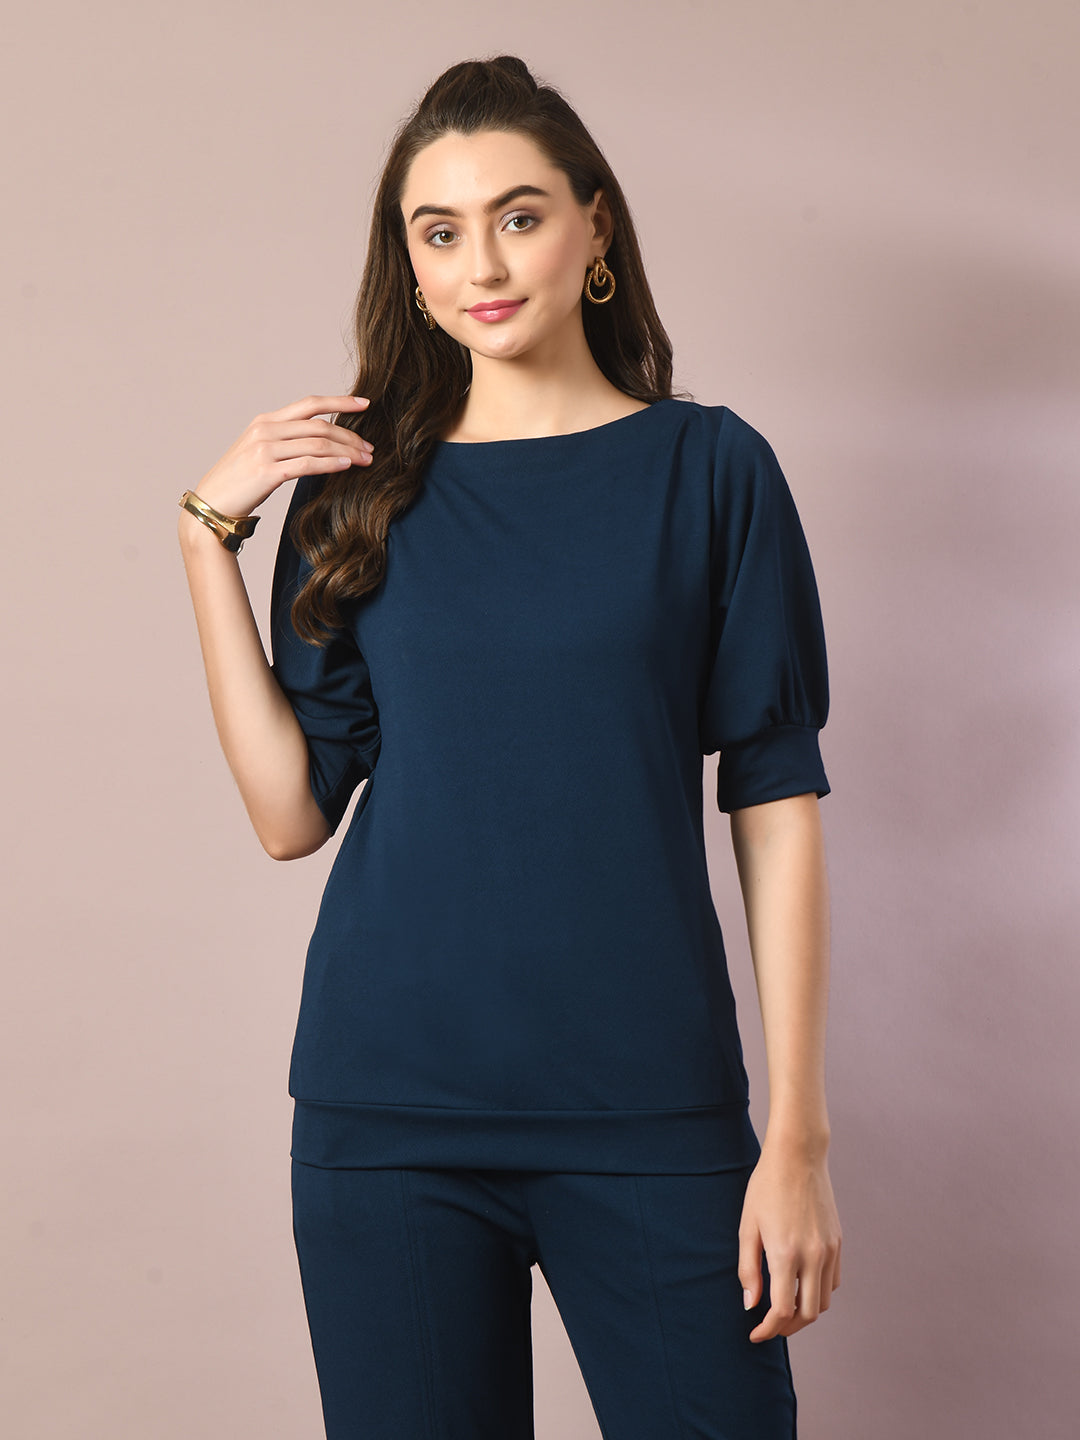 Women's  Blue Solid Boat Neck Party Top  - Myshka